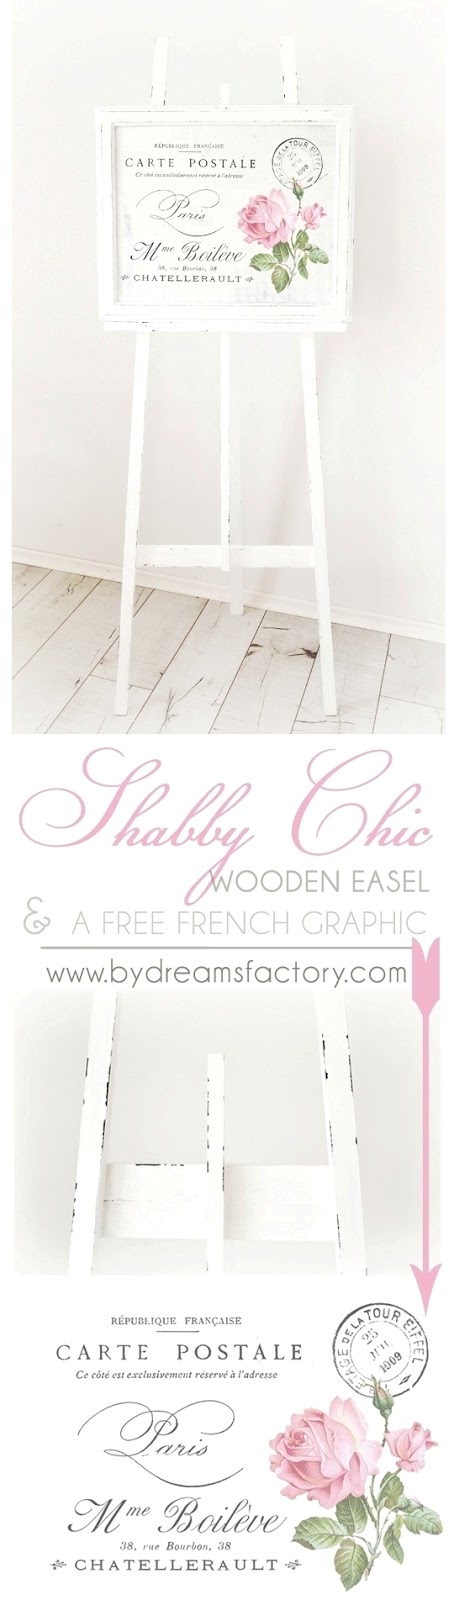 shabby chic wooden easel copy